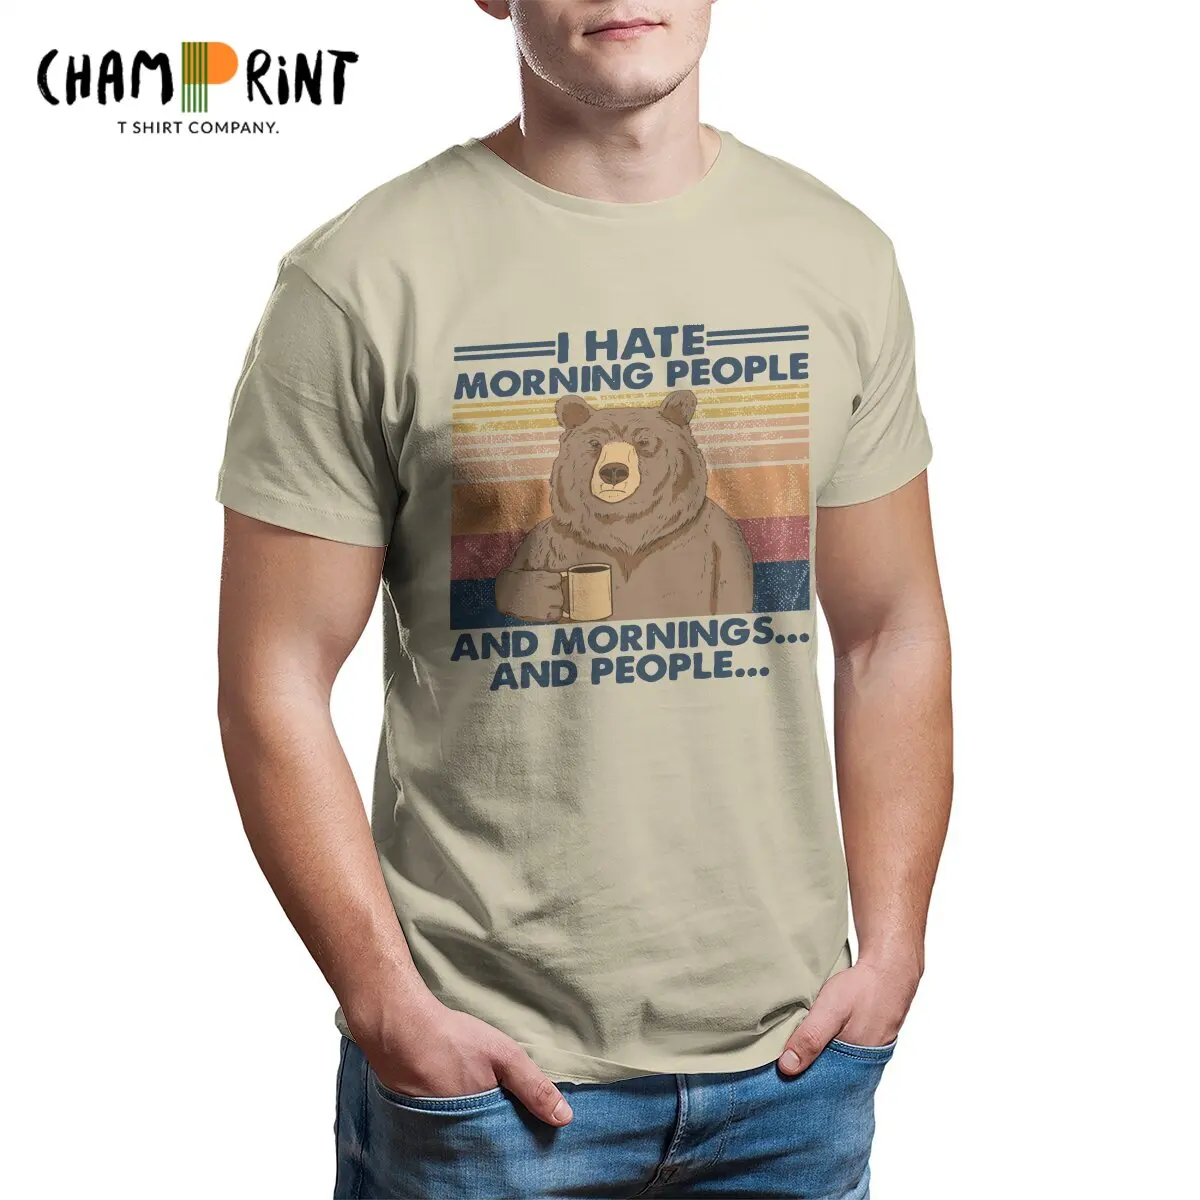 

I Hate Morning People and Mornings and People T-Shirts for Men Bear Vintage 100% Cotton Tees O Neck Short Sleeve T Shirt 6XL Top